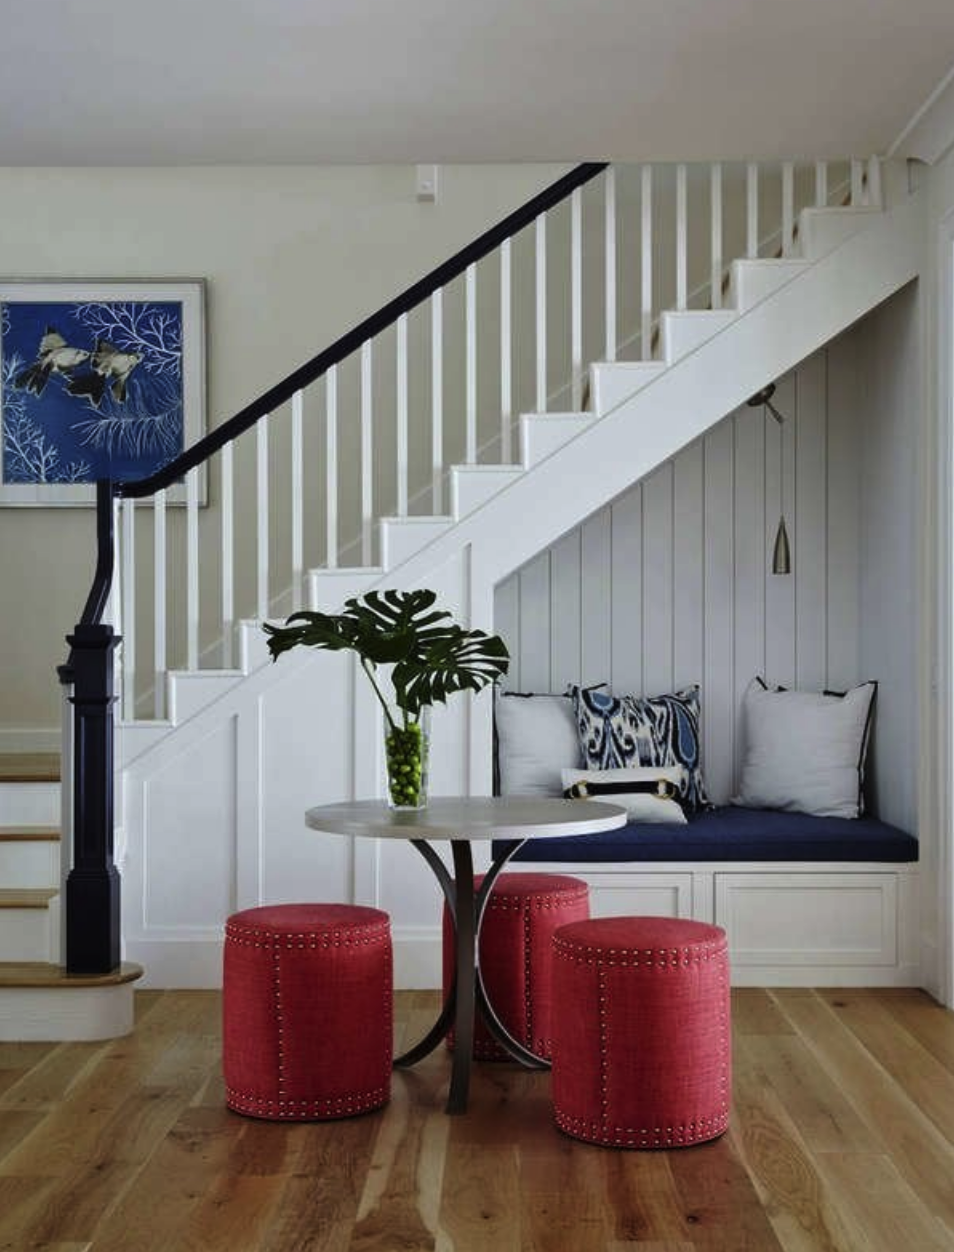 entryway view of staircase with cushioned bench inside nook behind round table with cylindrical red stools